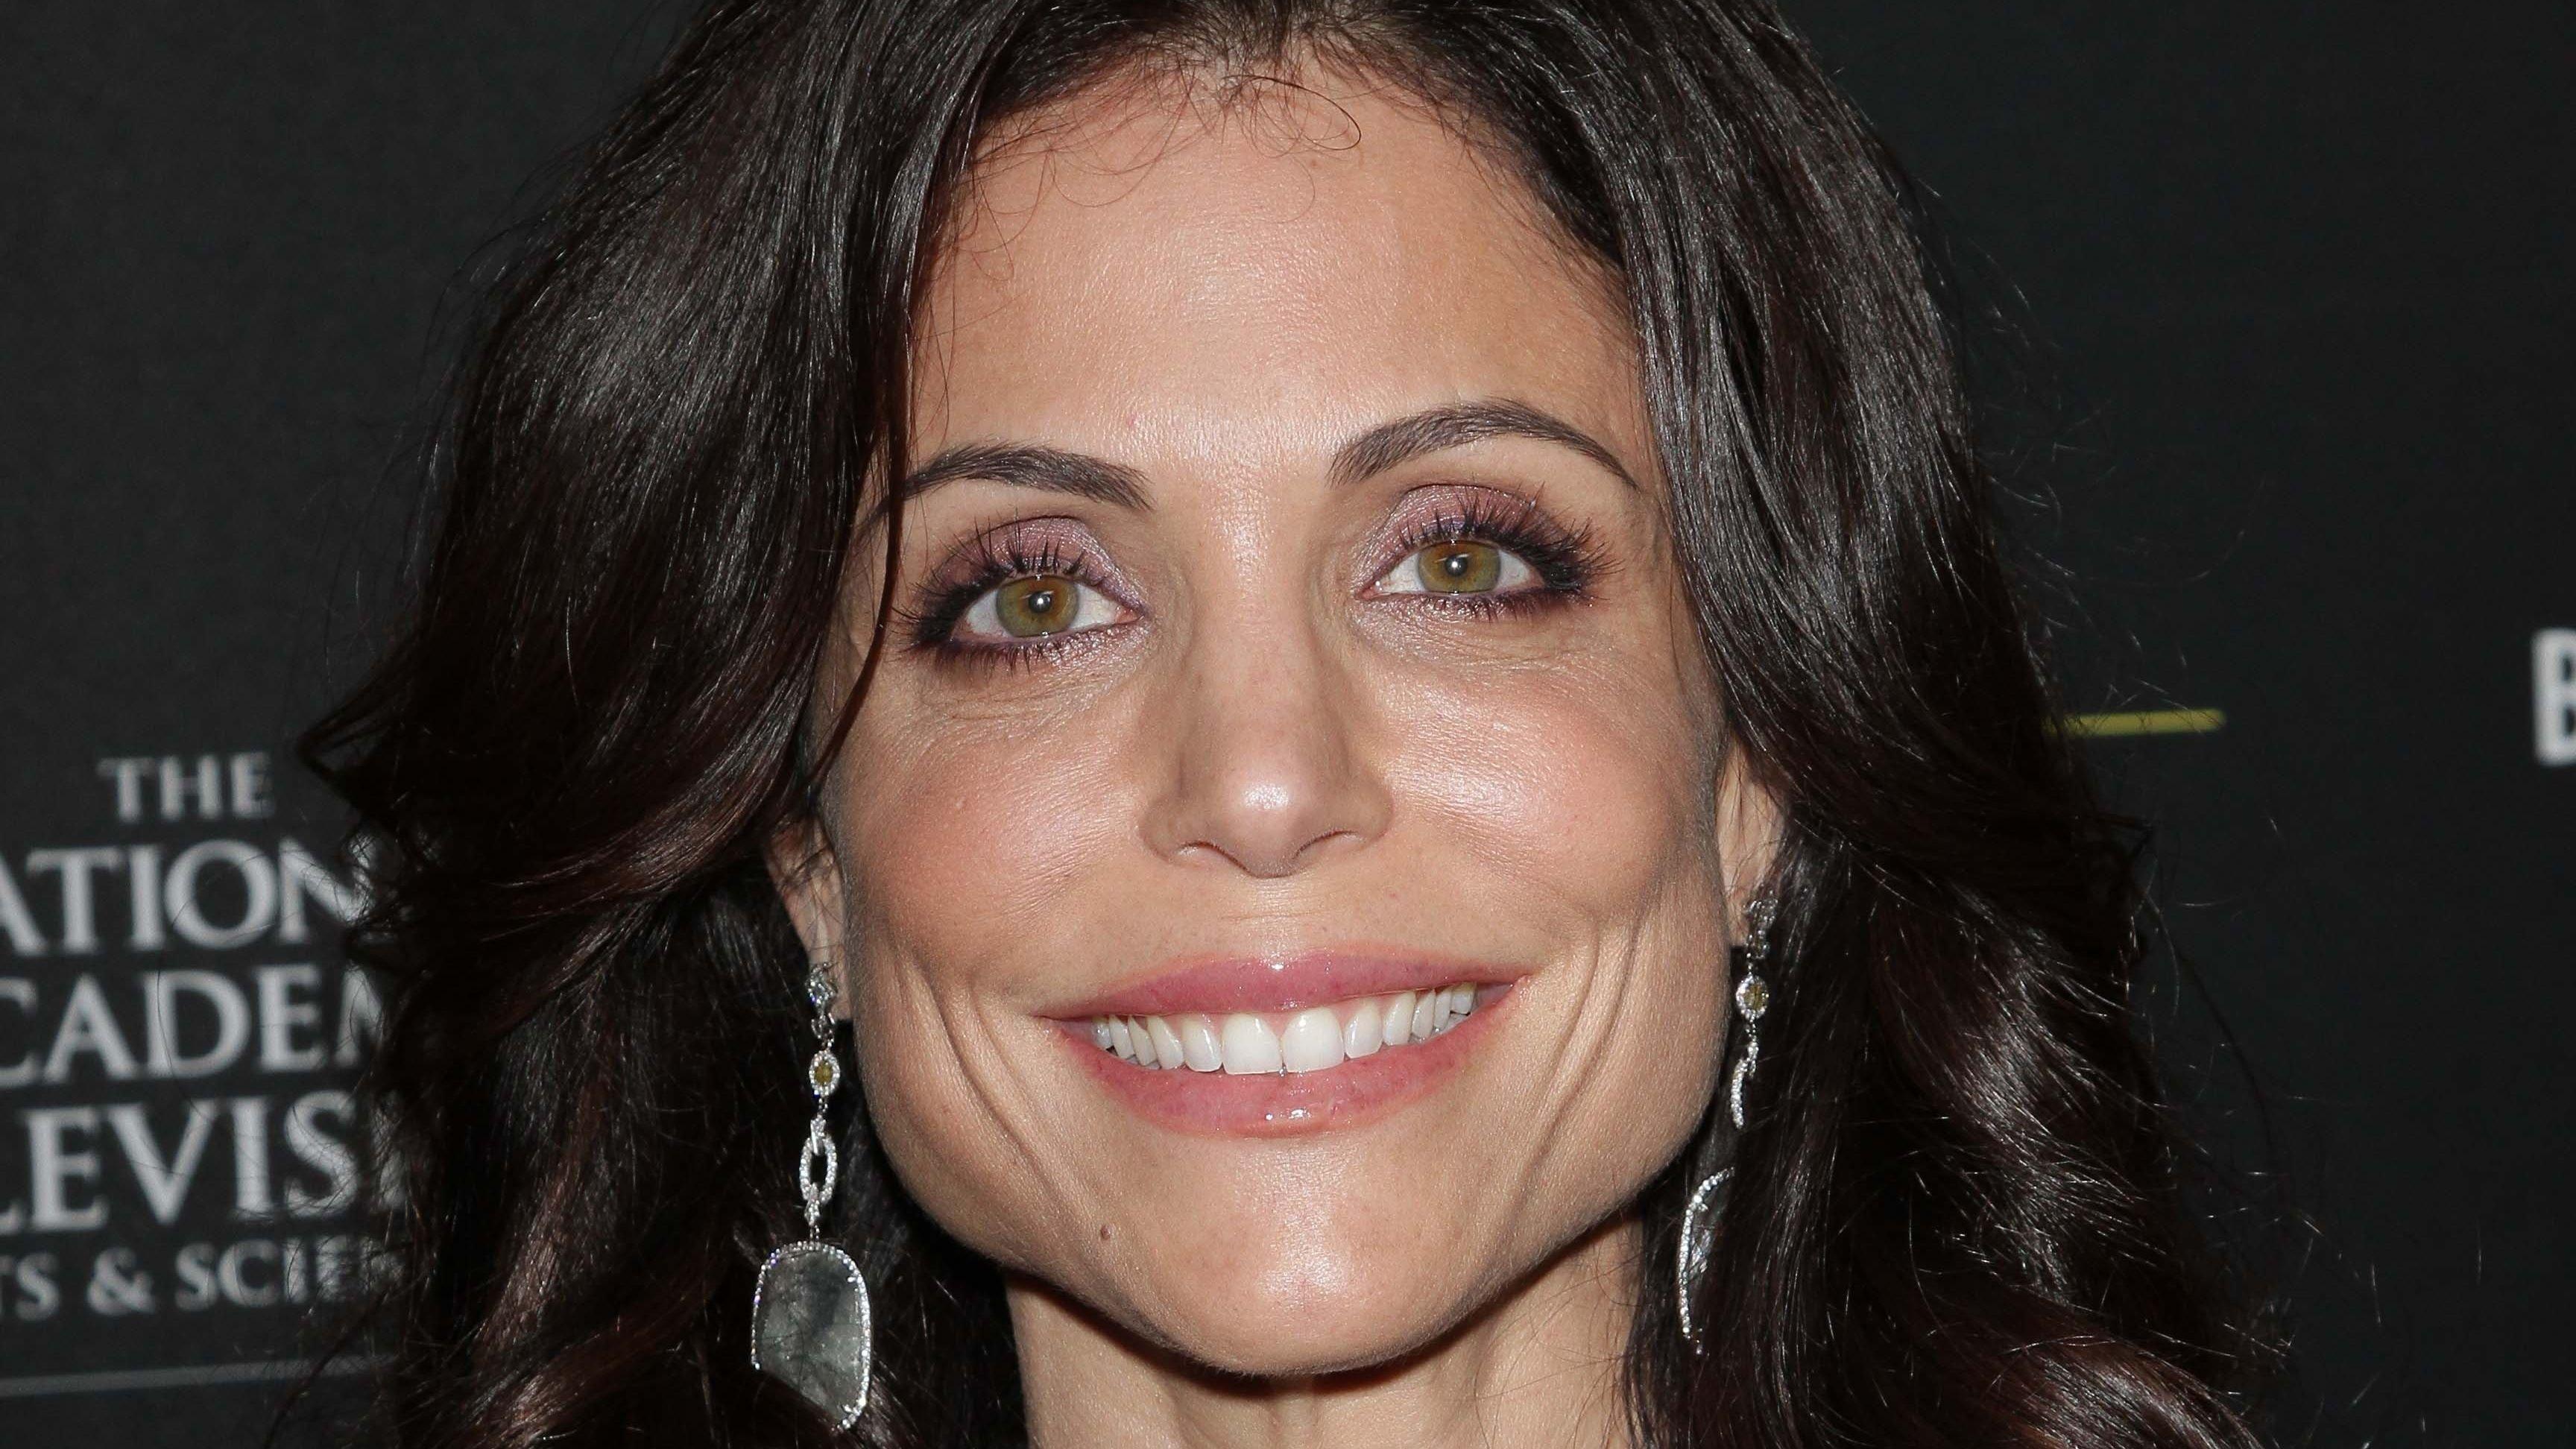 Bethenny Frankel smiles with curled hair